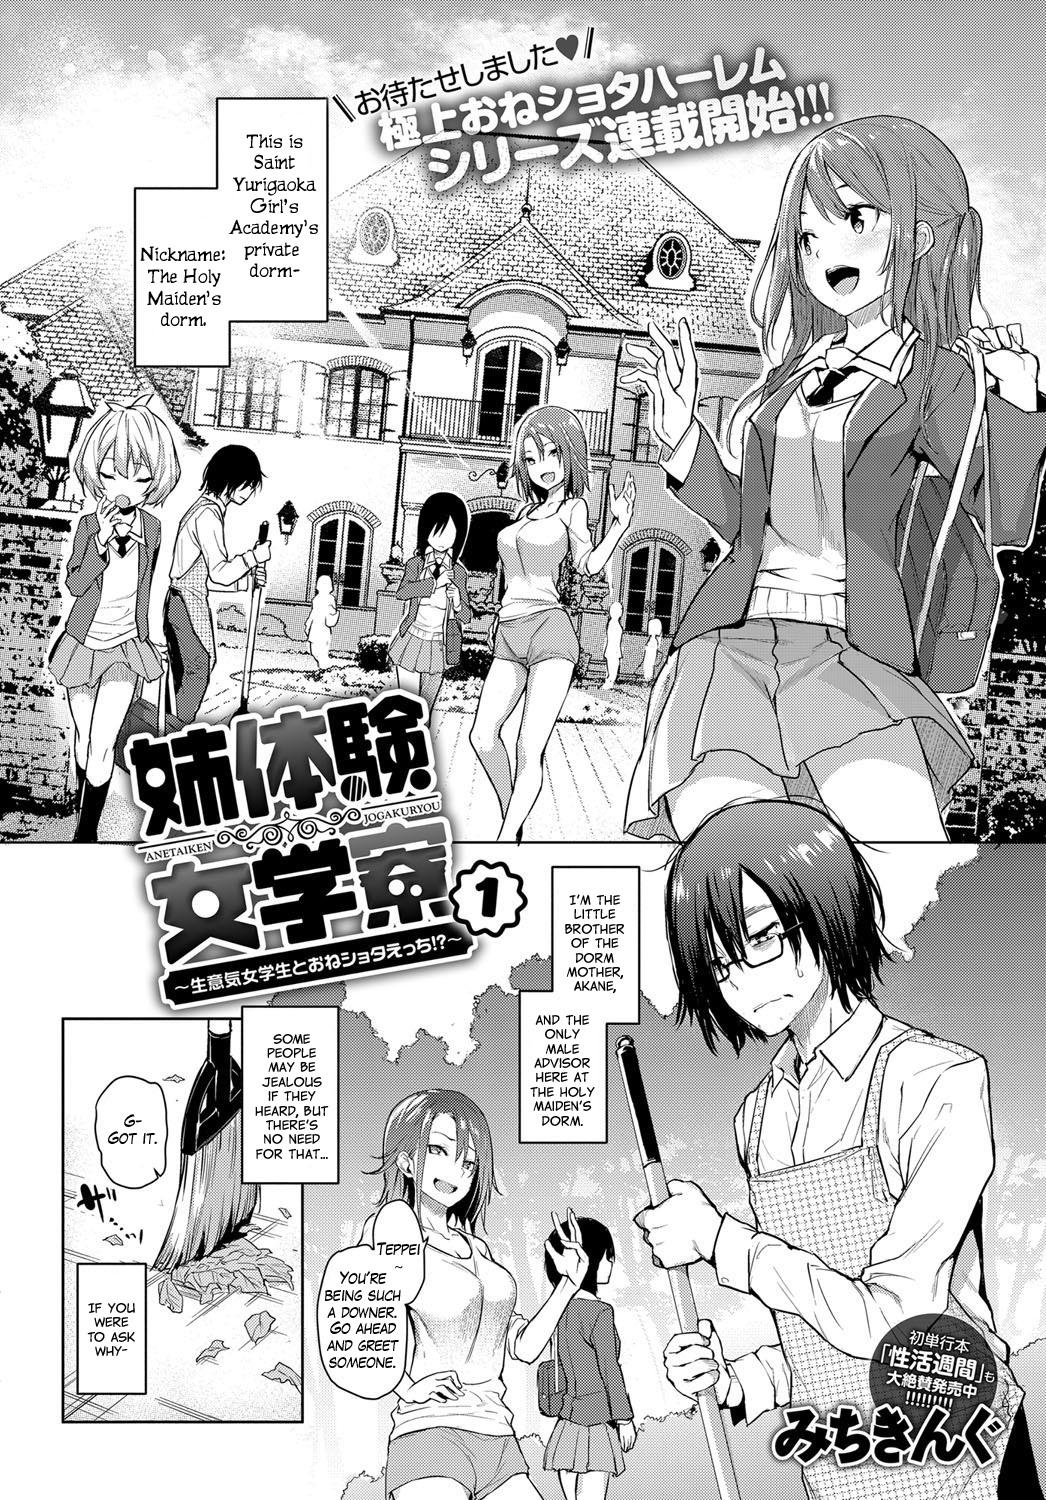 Gilf Ane Taiken Jogakuryou 1 | Older Sister Experience - The Girls' Dormitory Spooning - Page 2